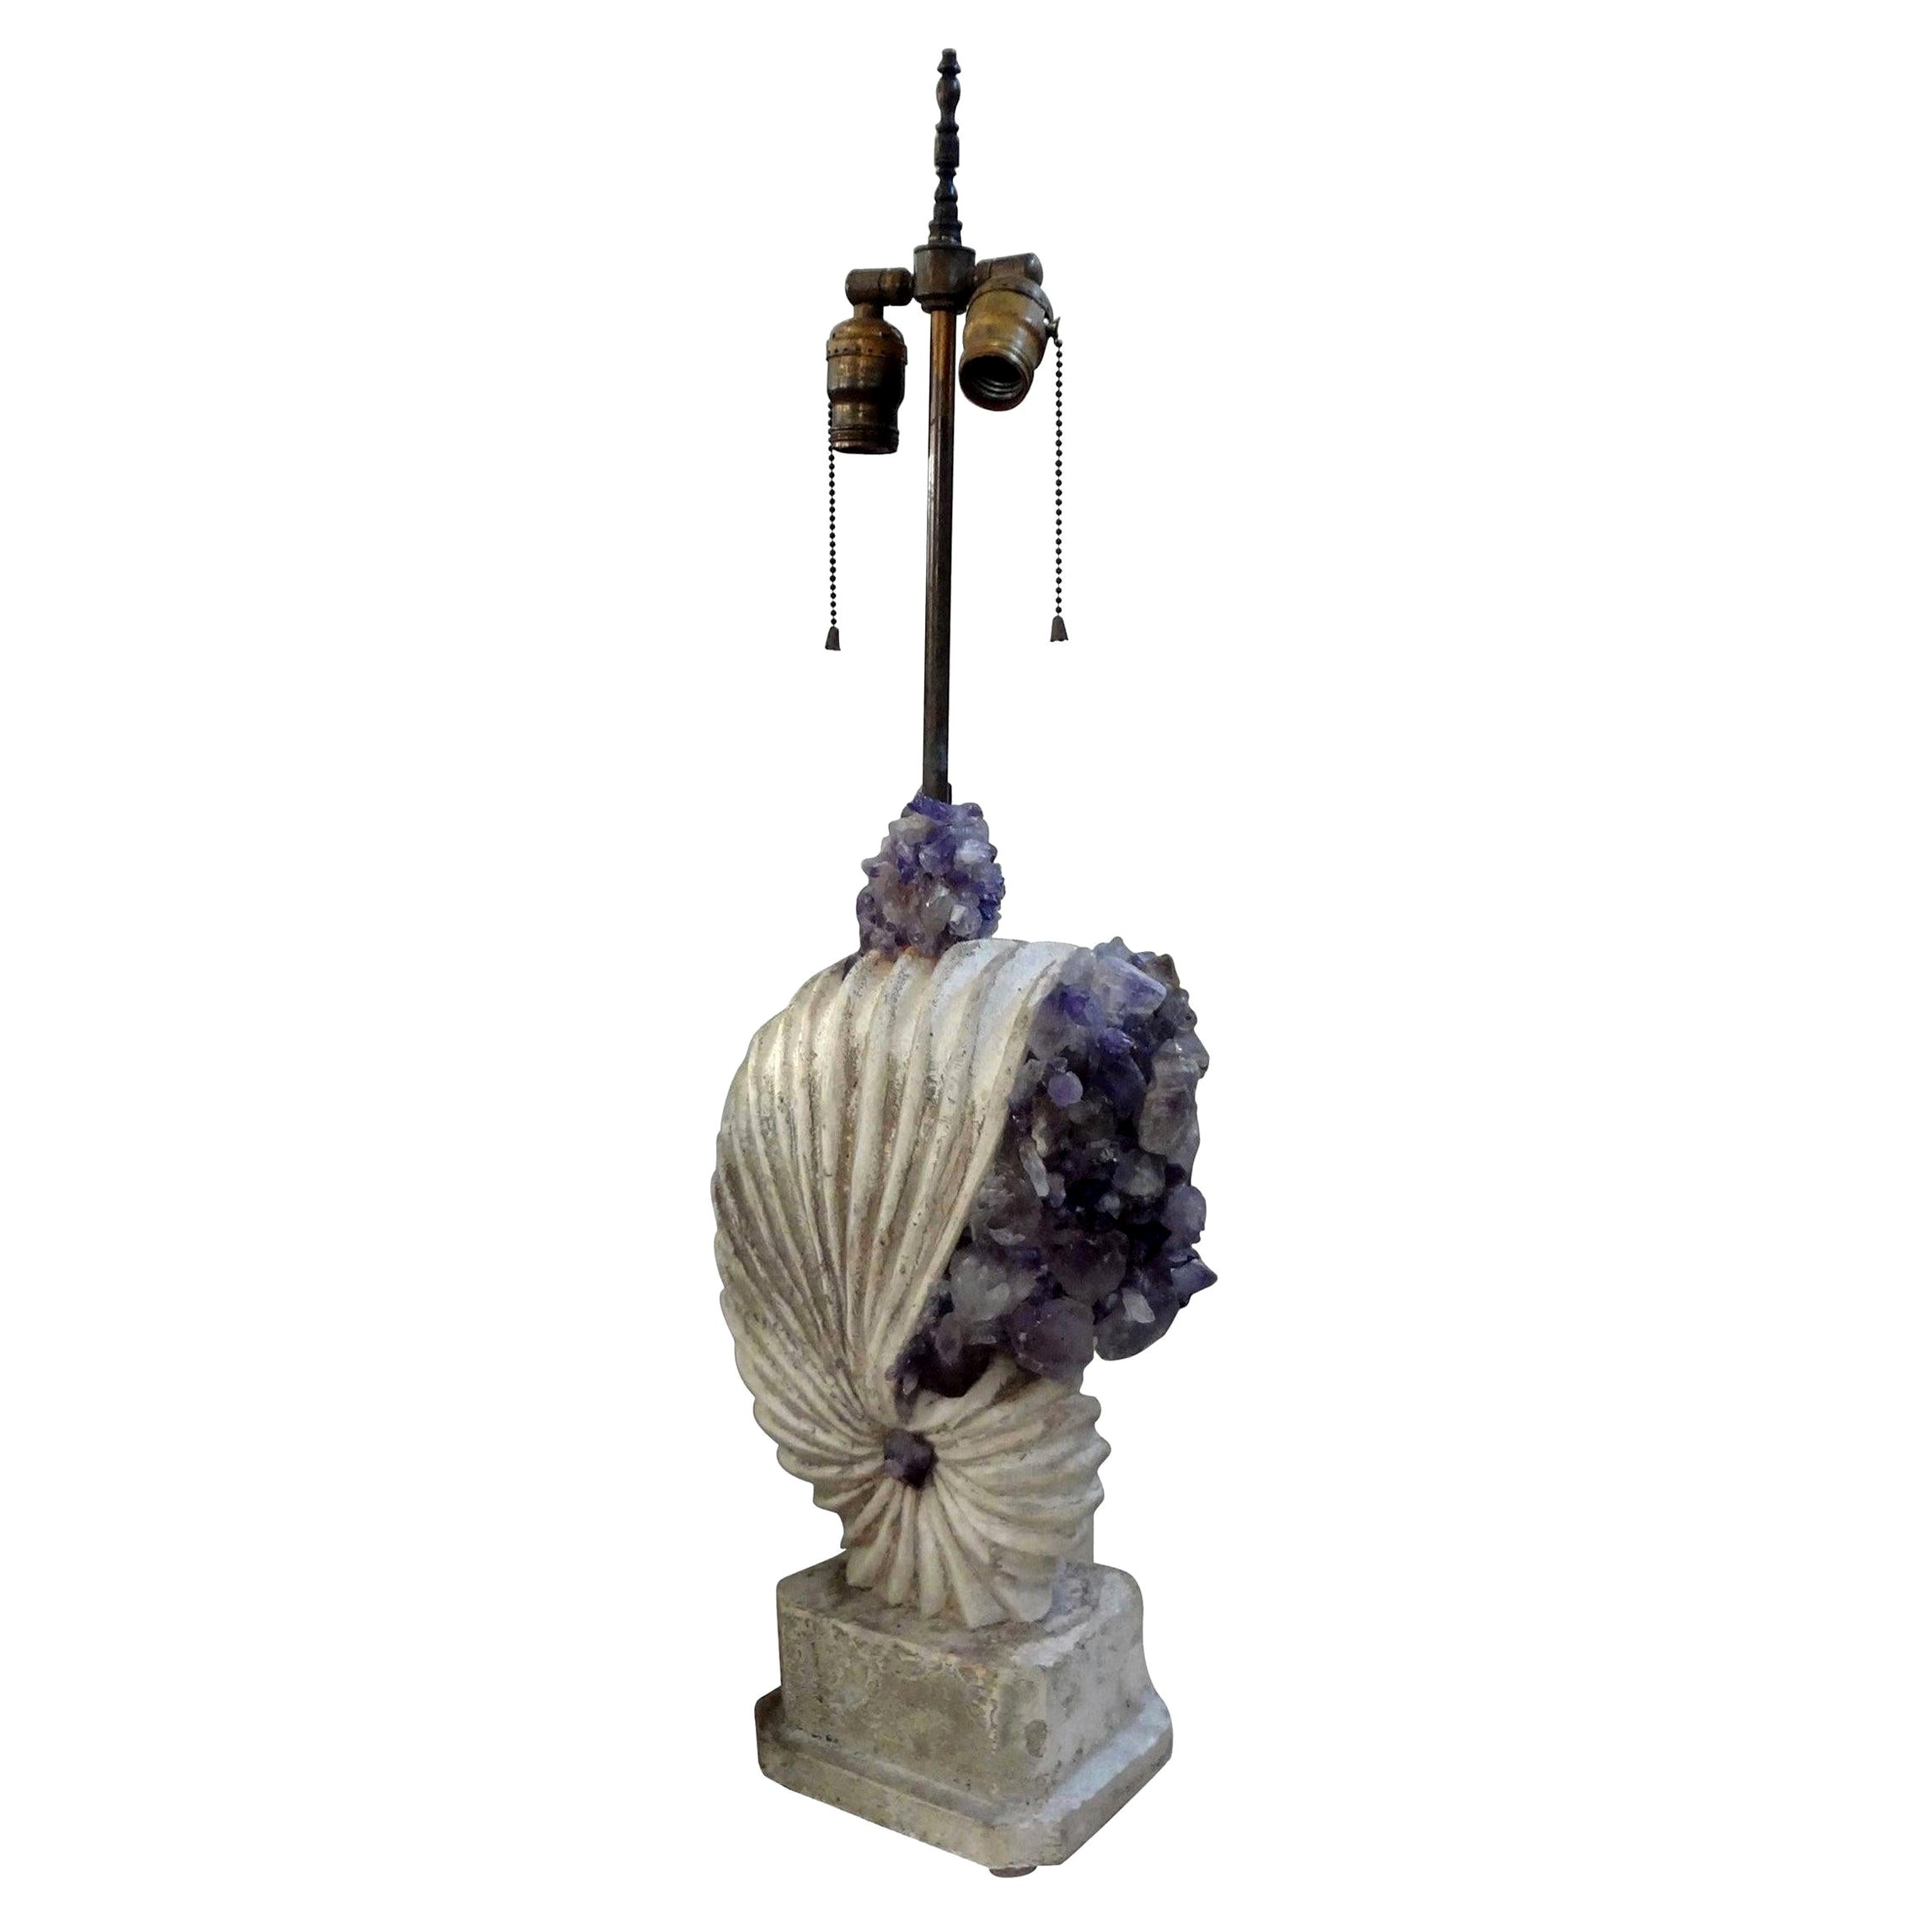 Stone Nautilus Shell Lamp Encrusted with Amethyst Rock Crystals For Sale